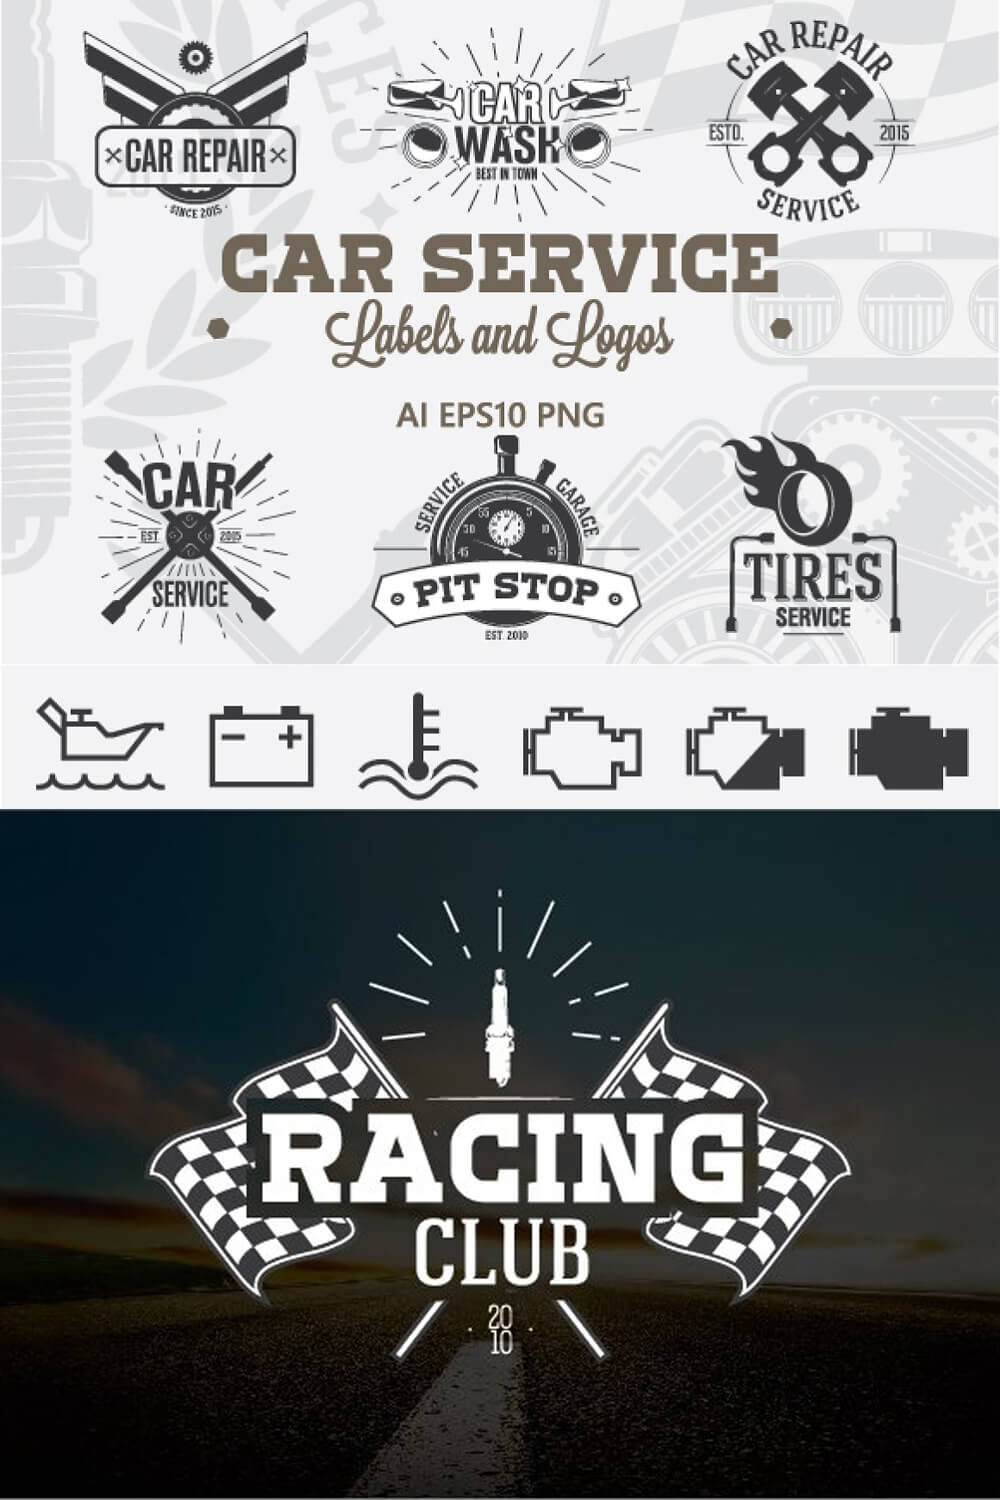 Large "Racing Club" logo on a dark background and 12 small car service labels on a gray background.